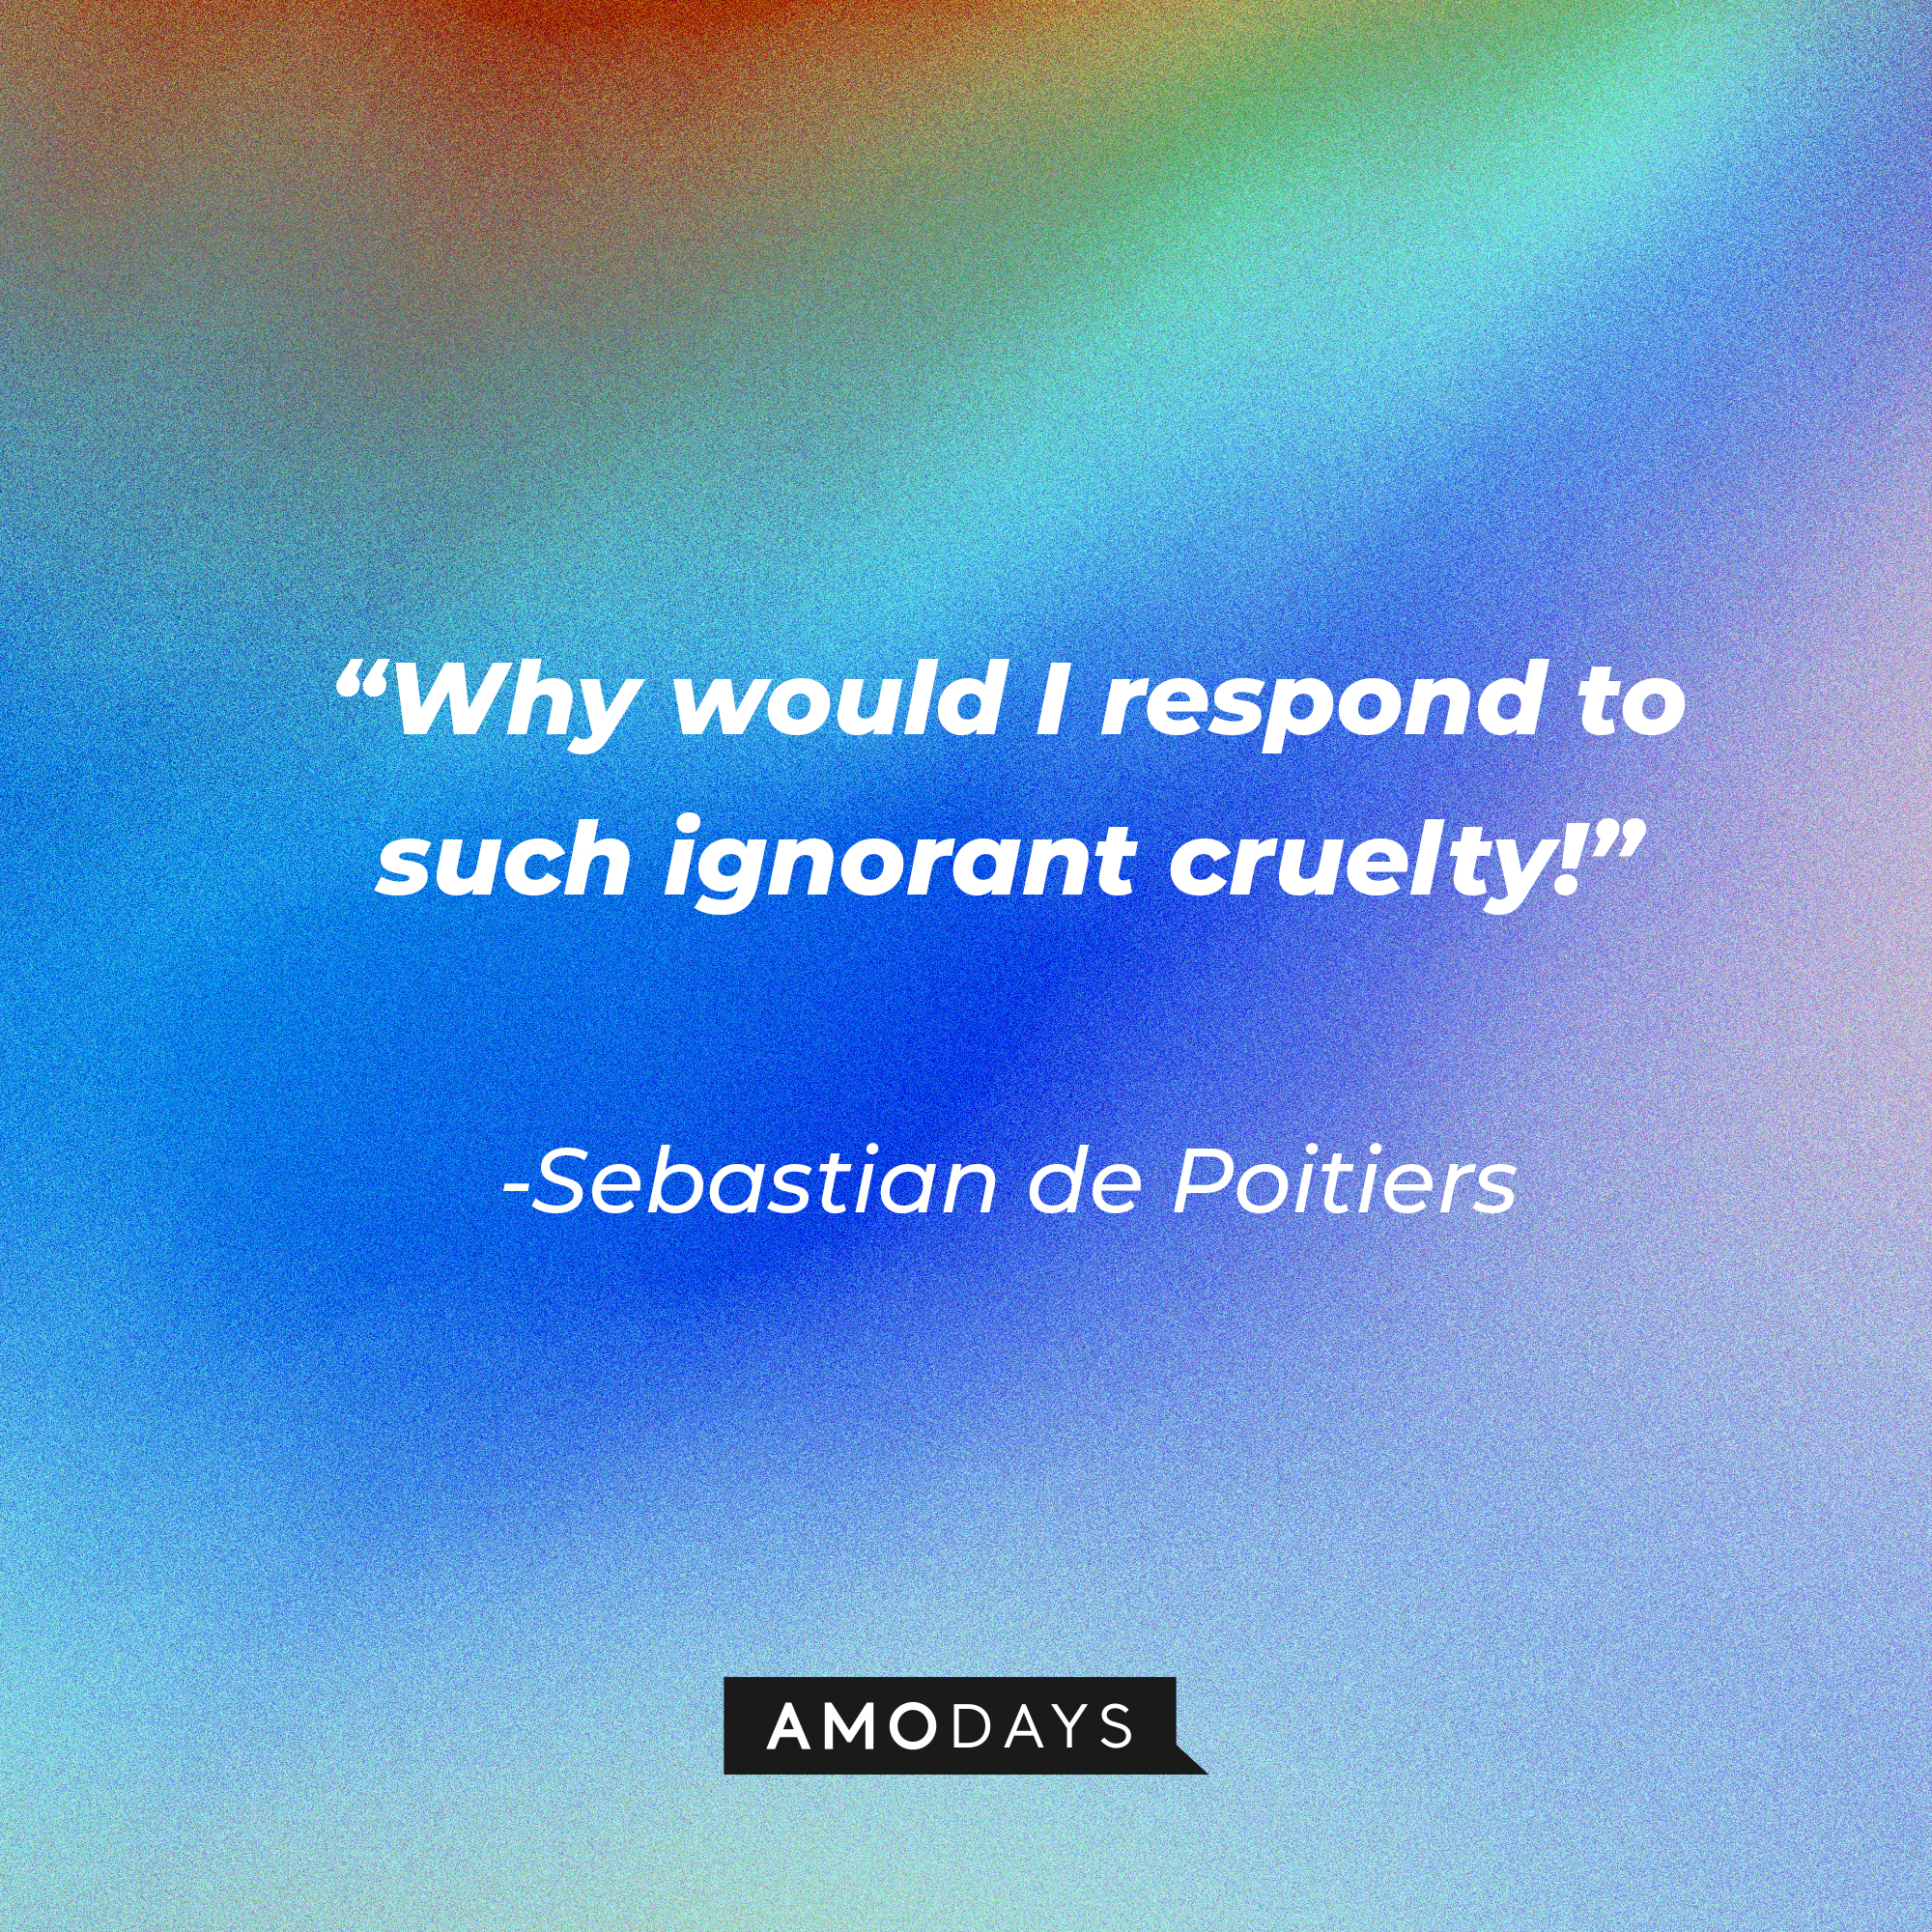 Sebastian de Poitiers' quote in "Reign:" “Why would I respond to such ignorant cruelty!” | Source: Amodays